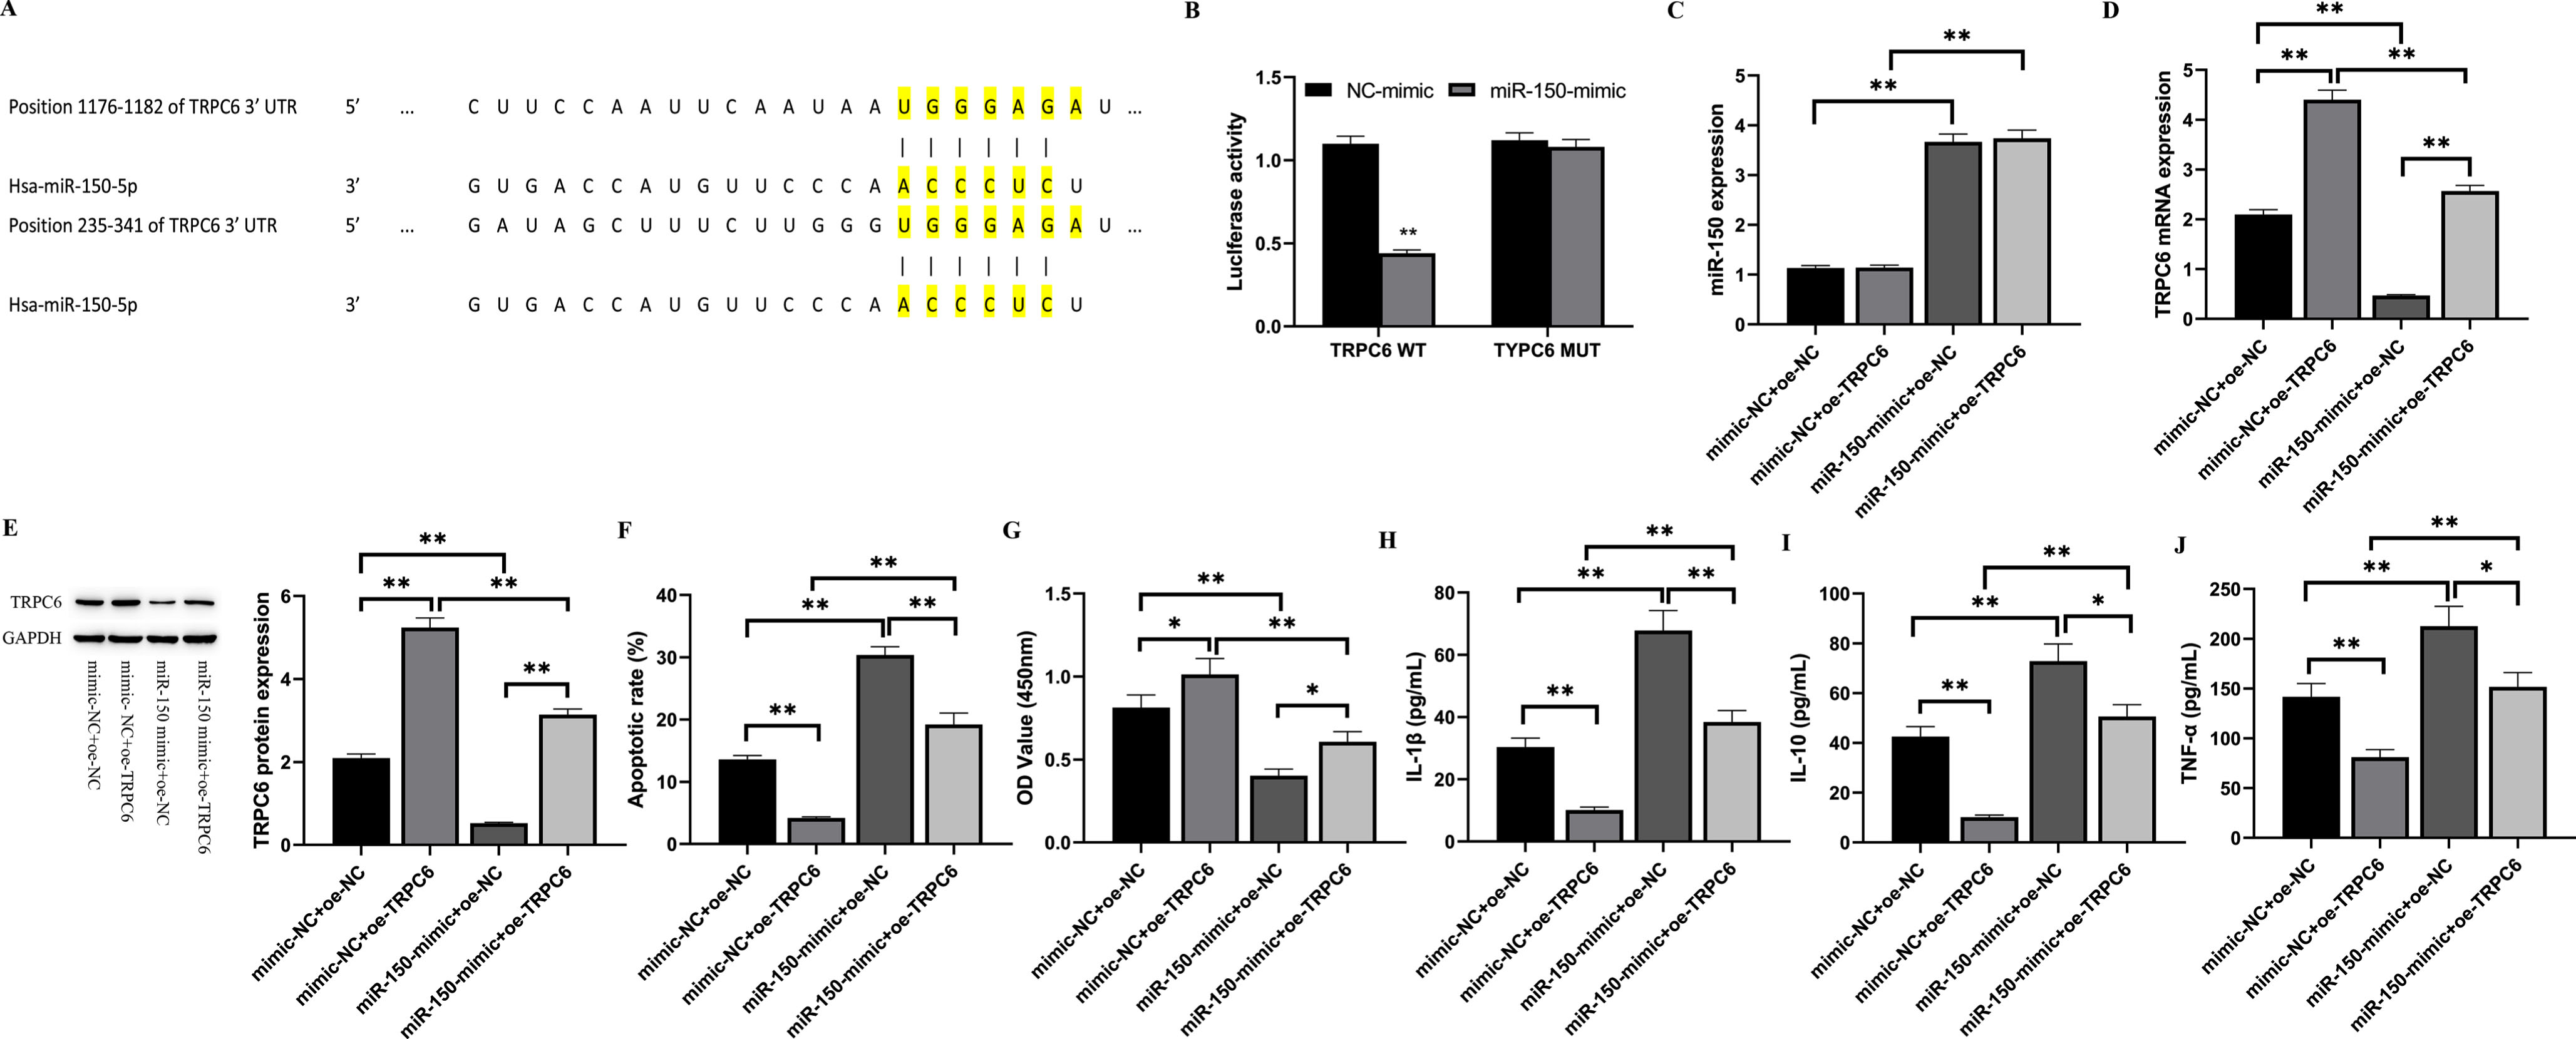 miR-150 promotes the release of inflammatory factors and H/R injury in HK-2 cells by acting as a targeted inhibitor of TRPC6.